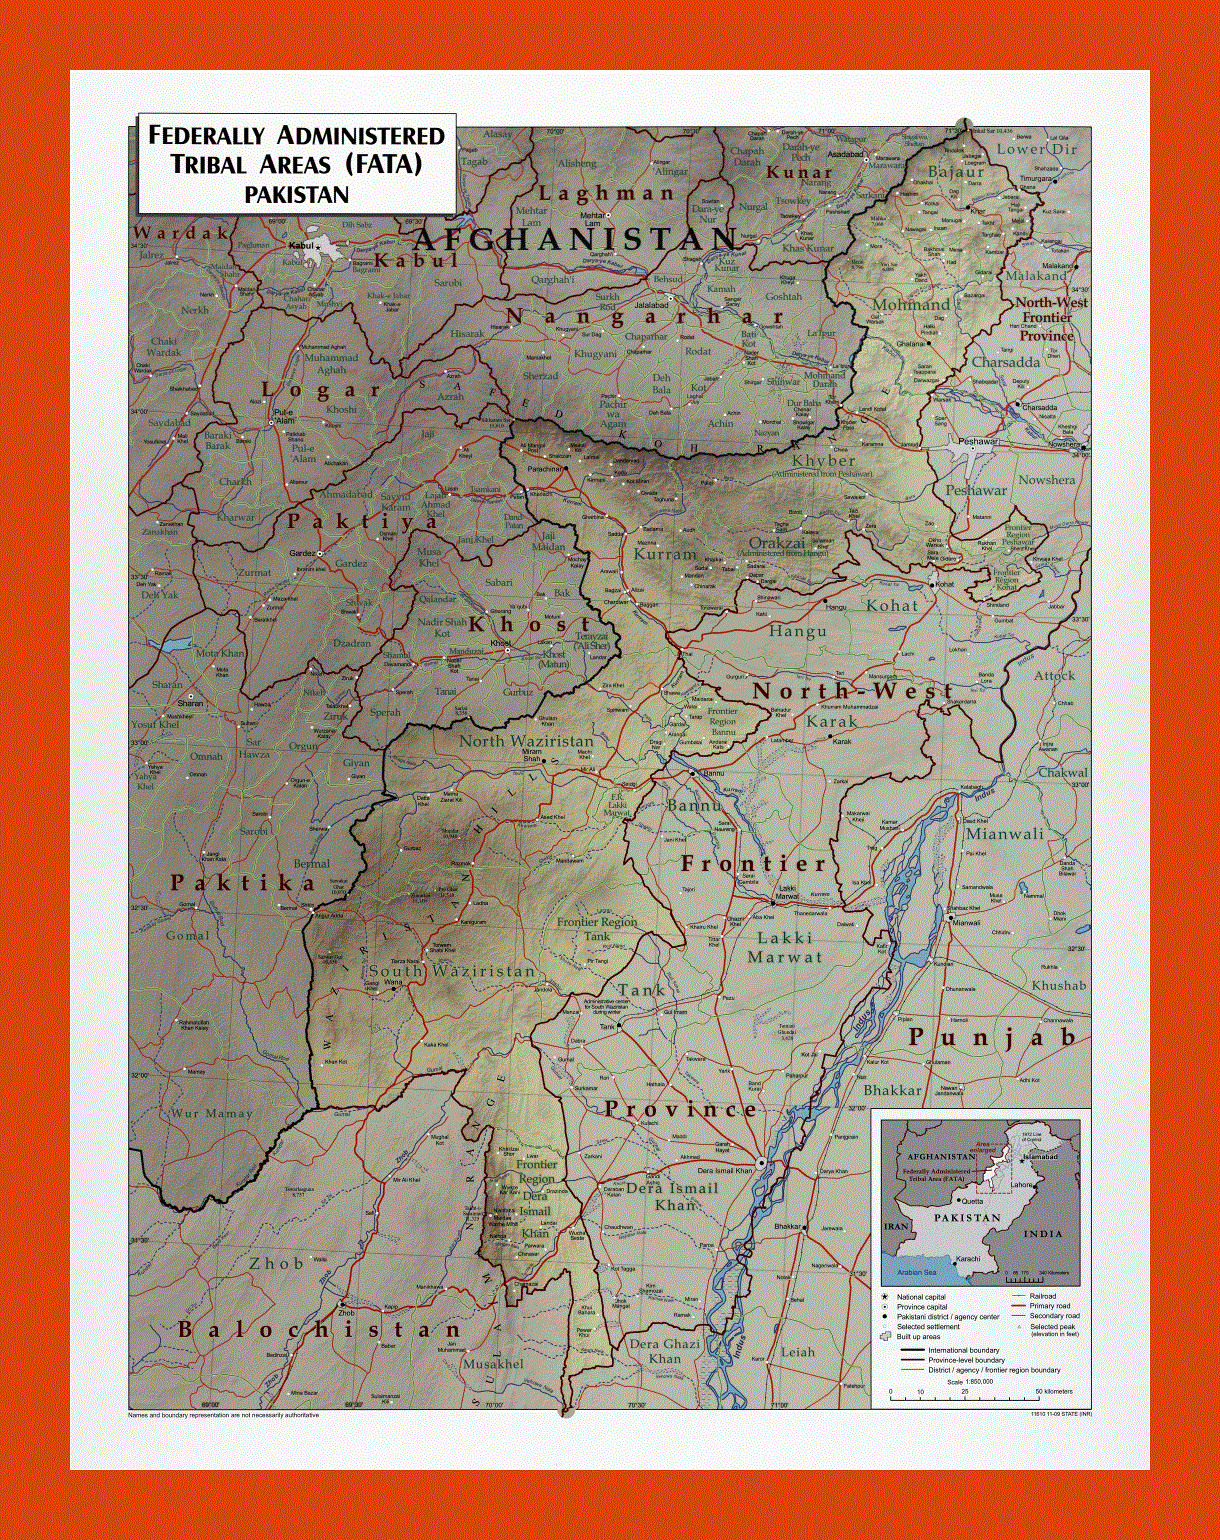 Federally Administered Tribal Areas (FATA) of Pakistan map - 2009